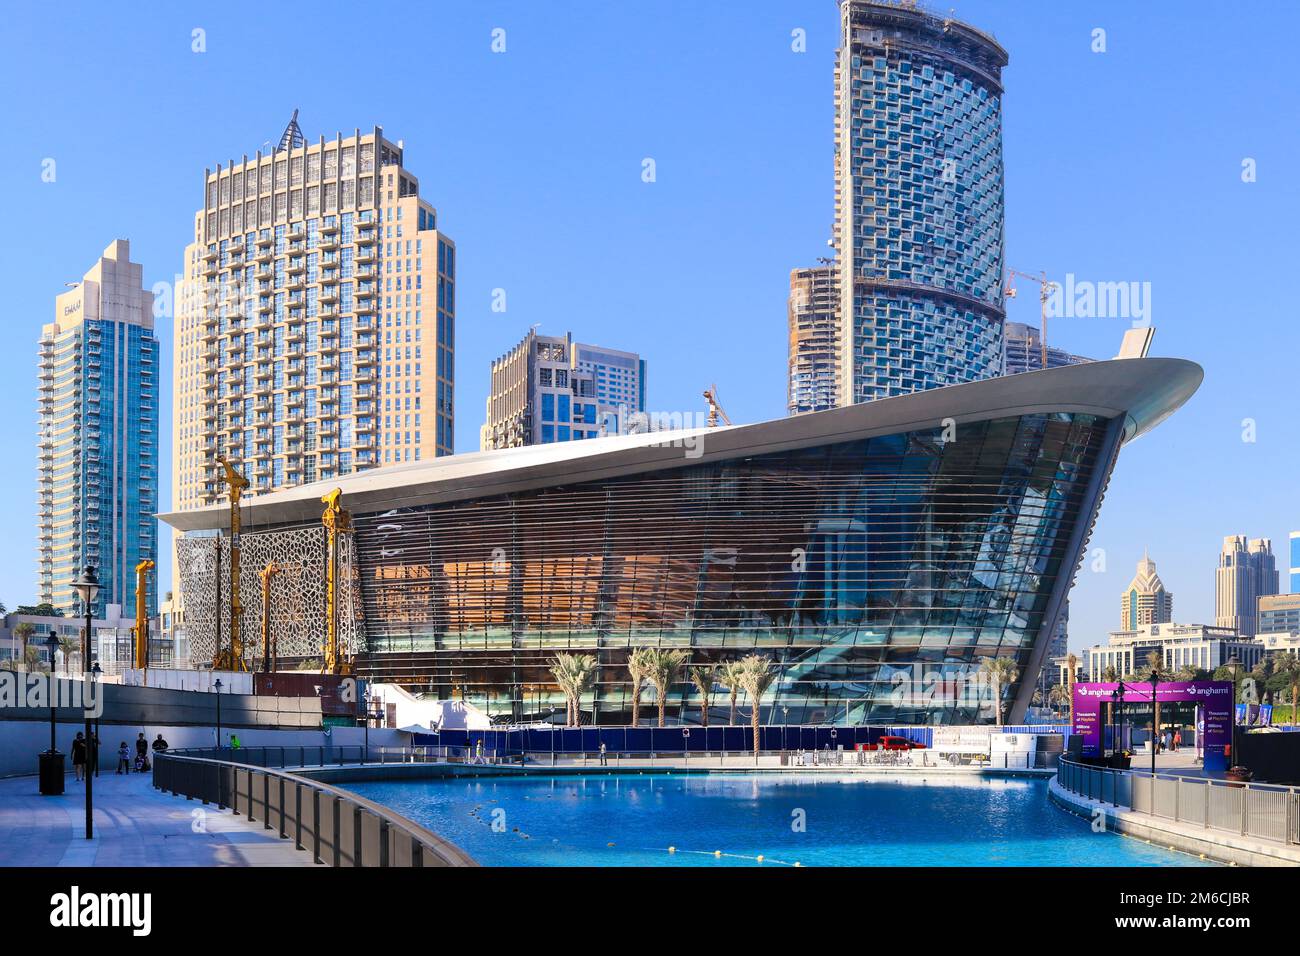 DUBAI, UAE - NOW 29: Dubai Opera Arts Centre, as seen on Now 29, 2017 at The Opera District in Downtown, Sheikh Mohammed bin Ras Stock Photo